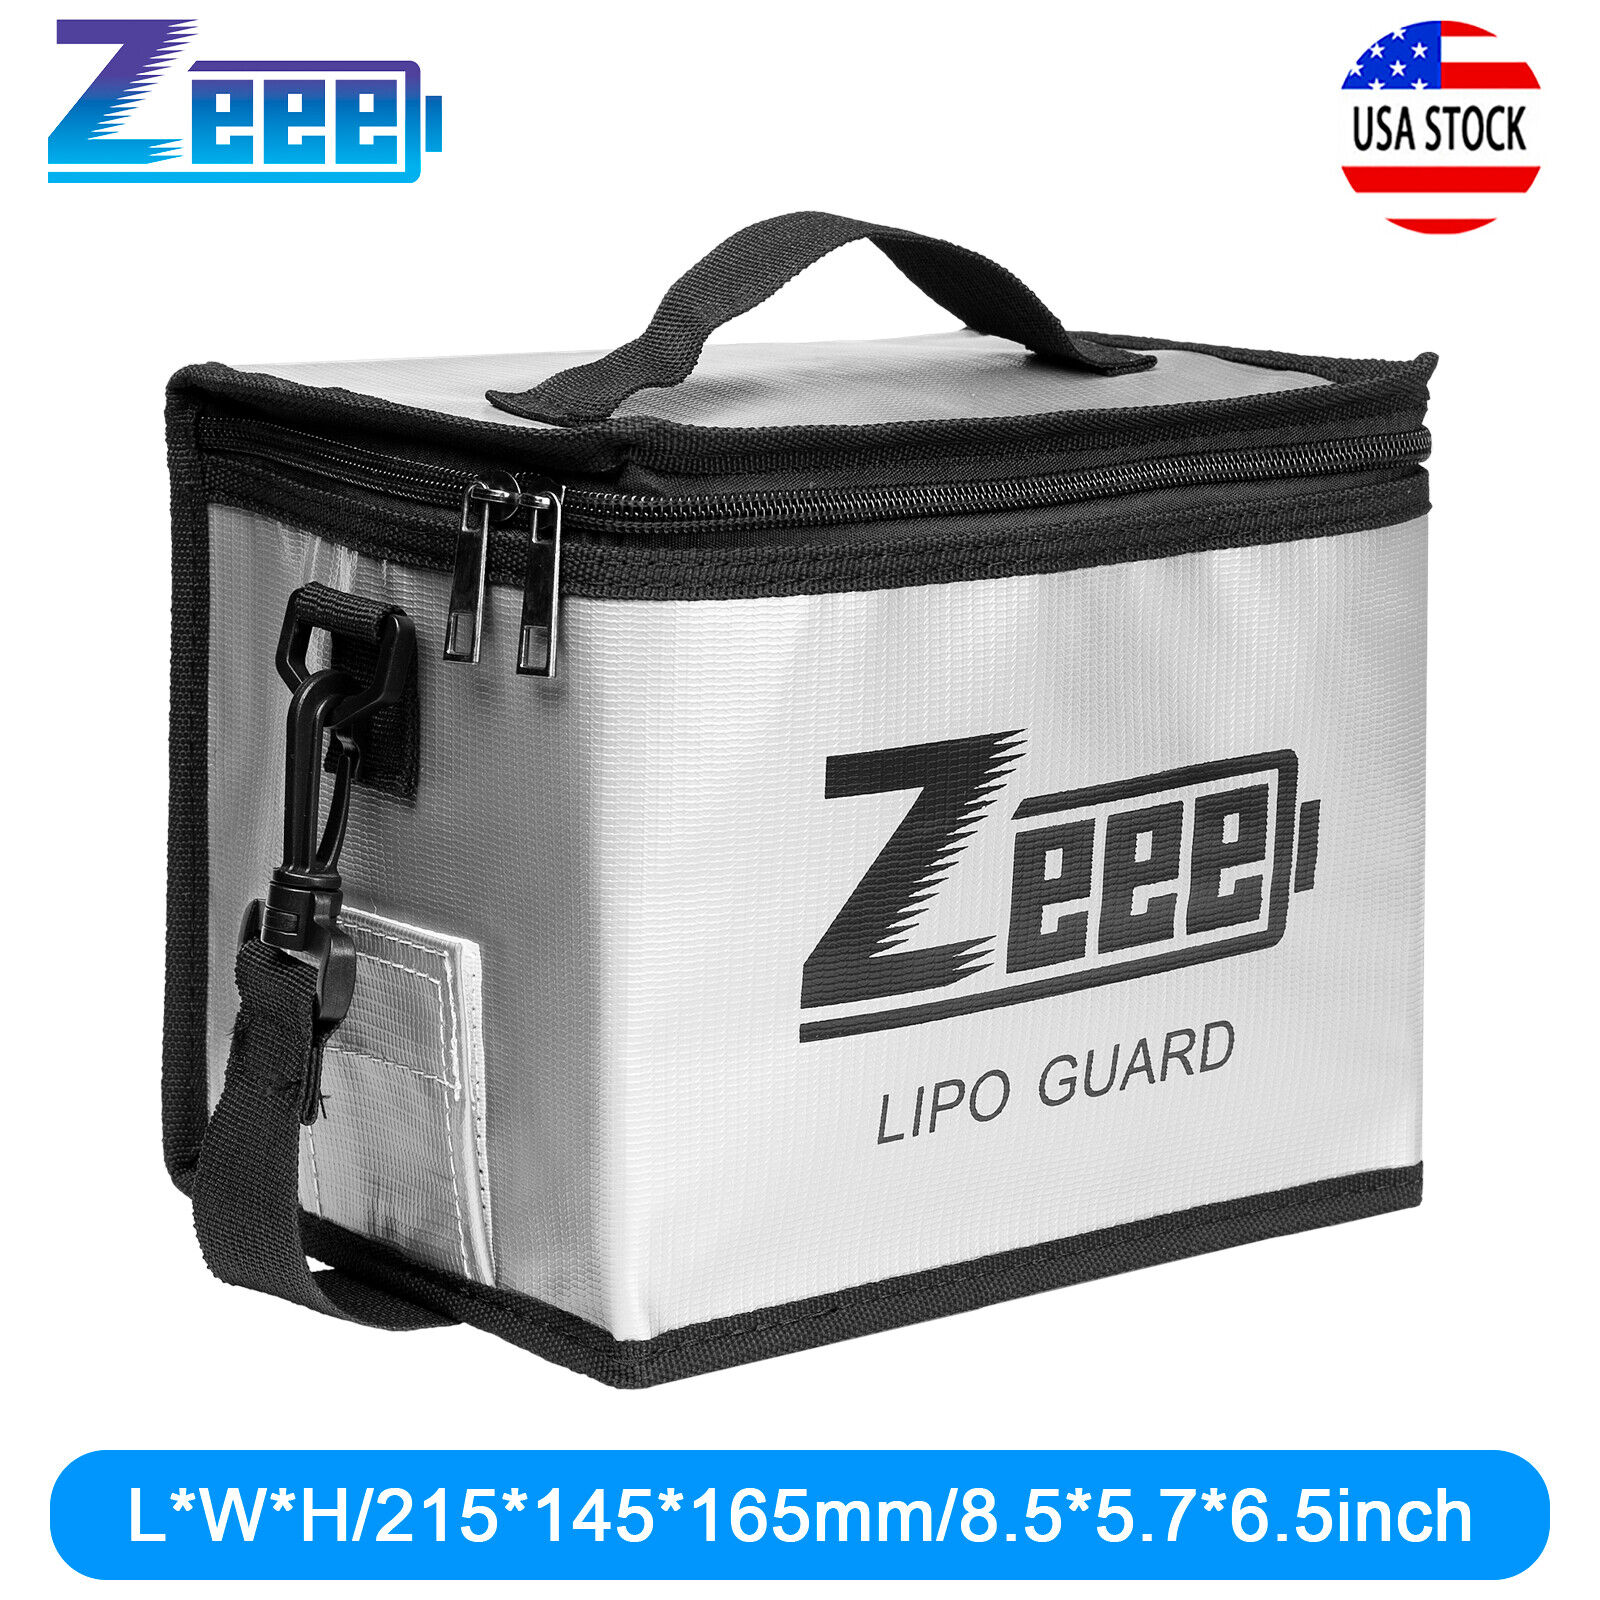 Zeee Lipo Battery Safe Guard Fireproof Explosionproof Bag for Charge & Storage 